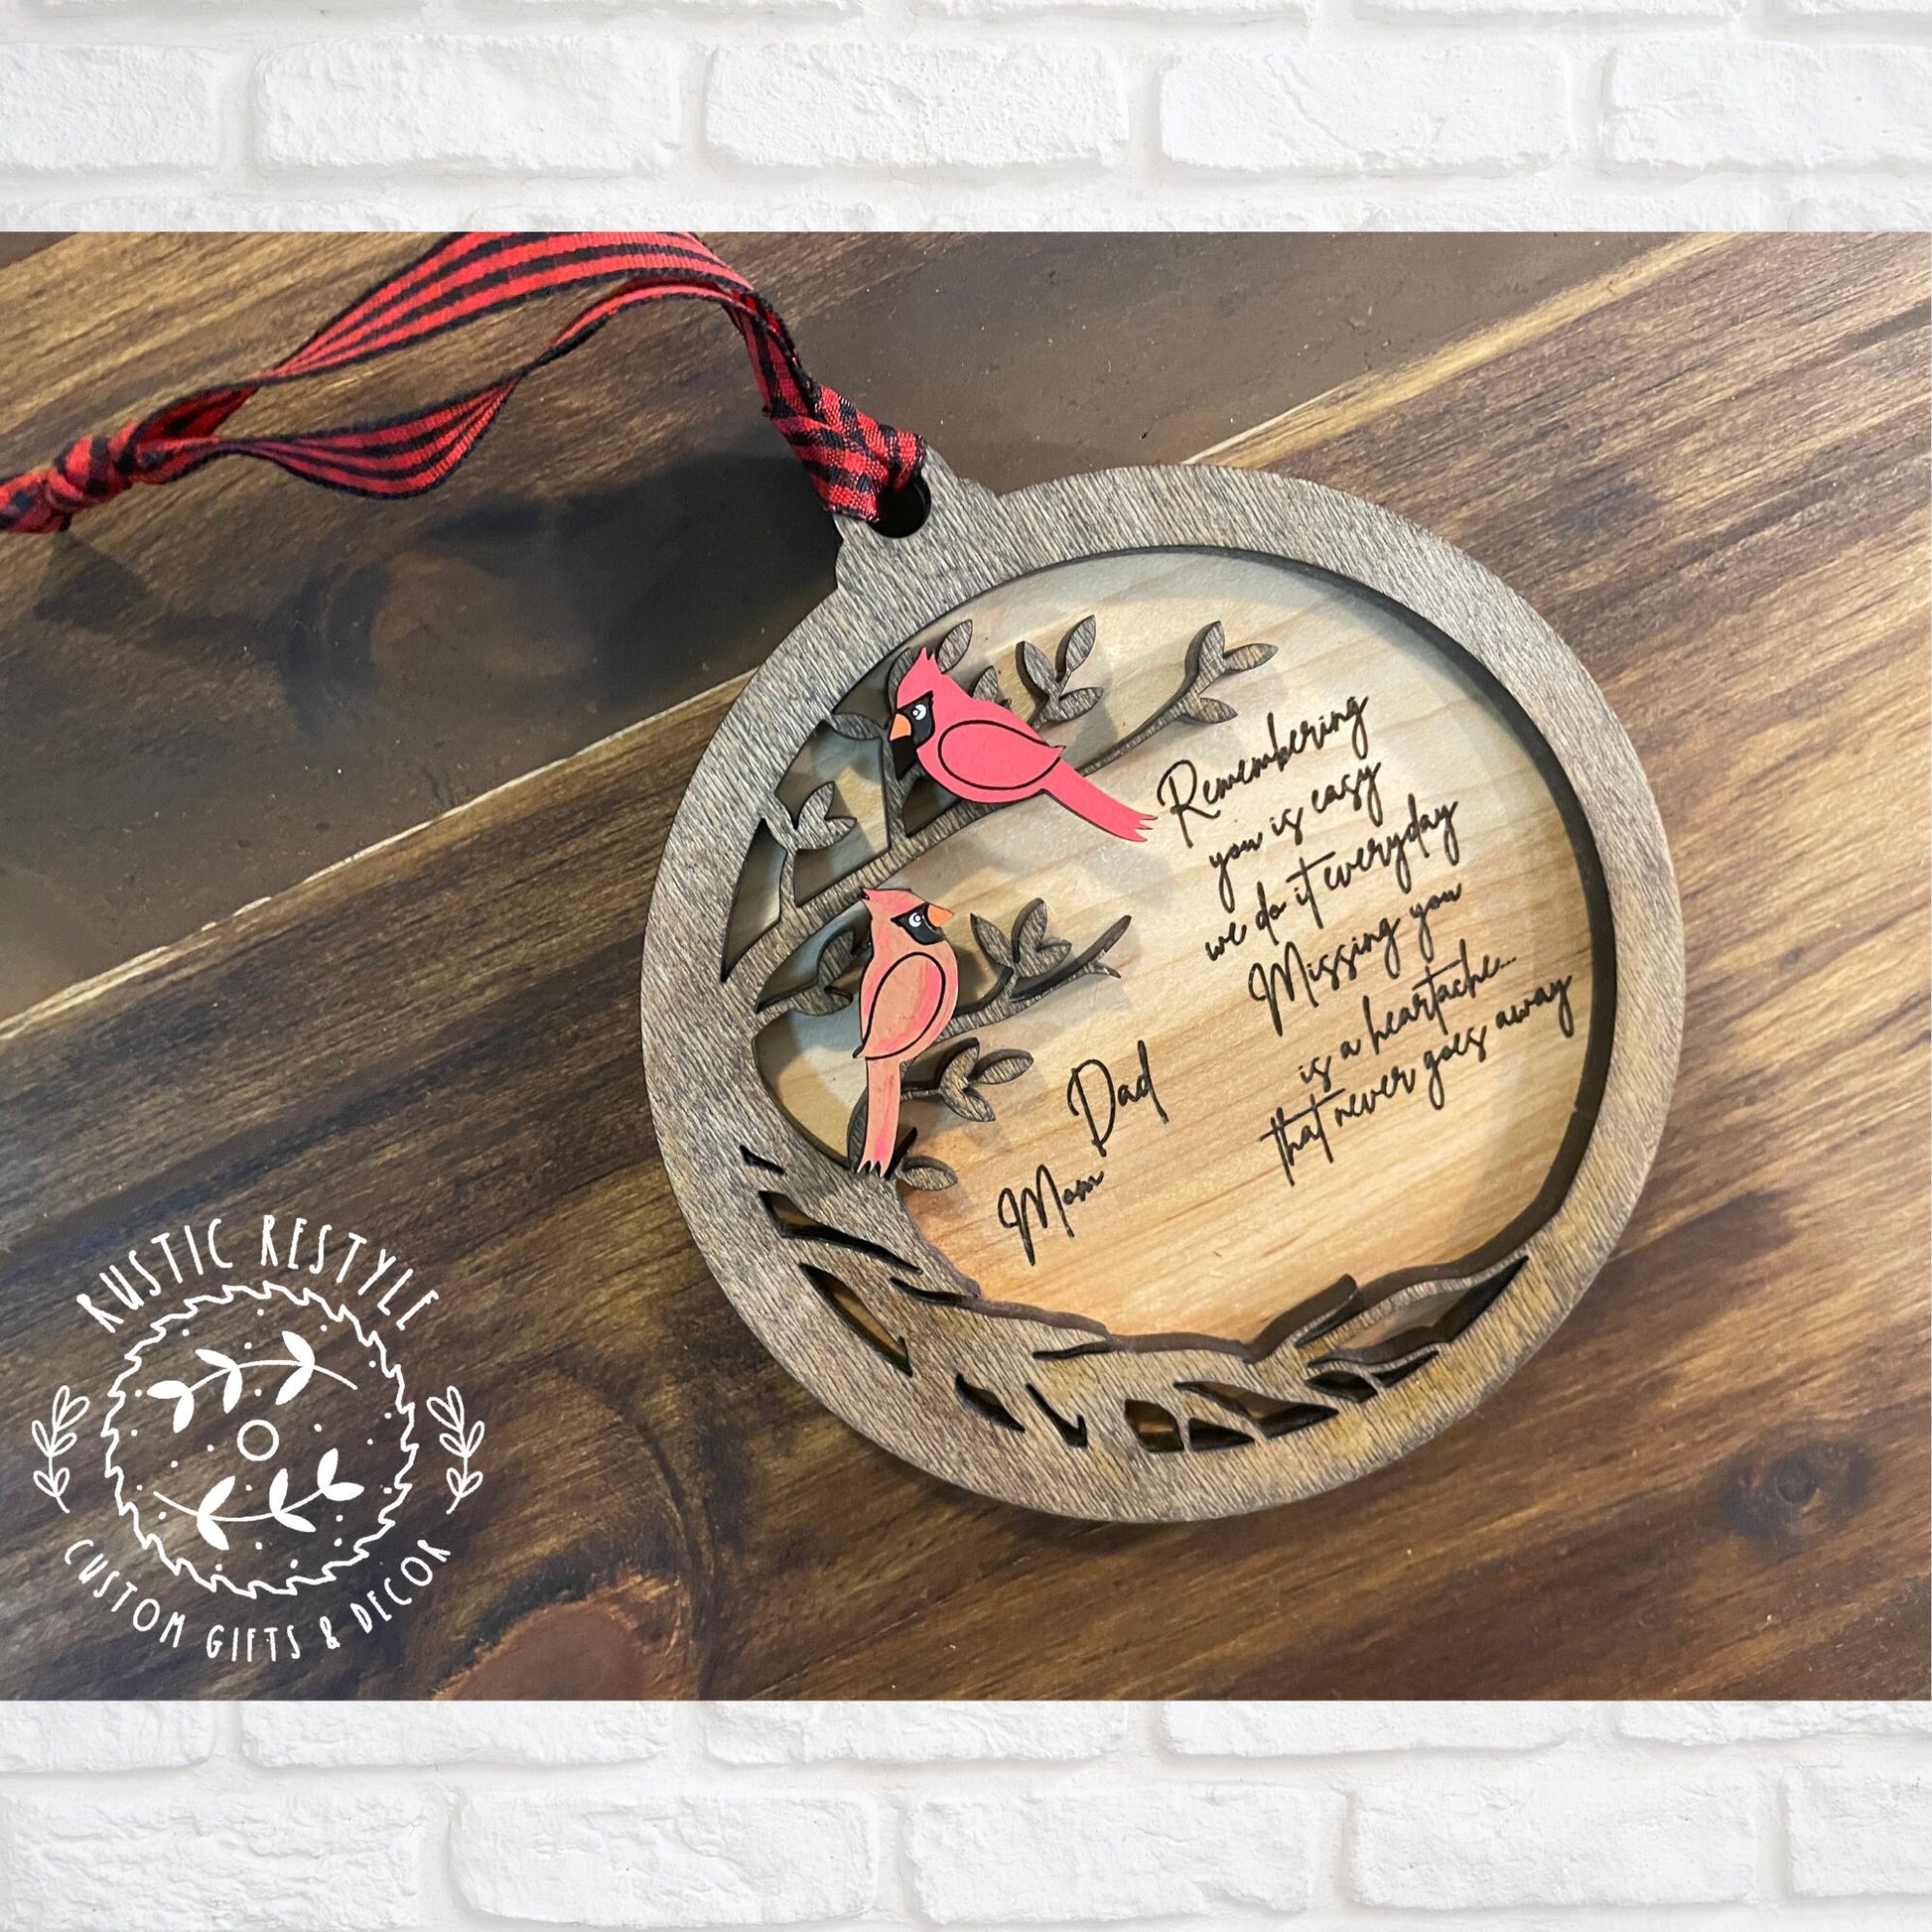 cardinal tree Remembrance ornament, a 4inch remembrance Christmas ornament that can be personalized with engraved names on the back